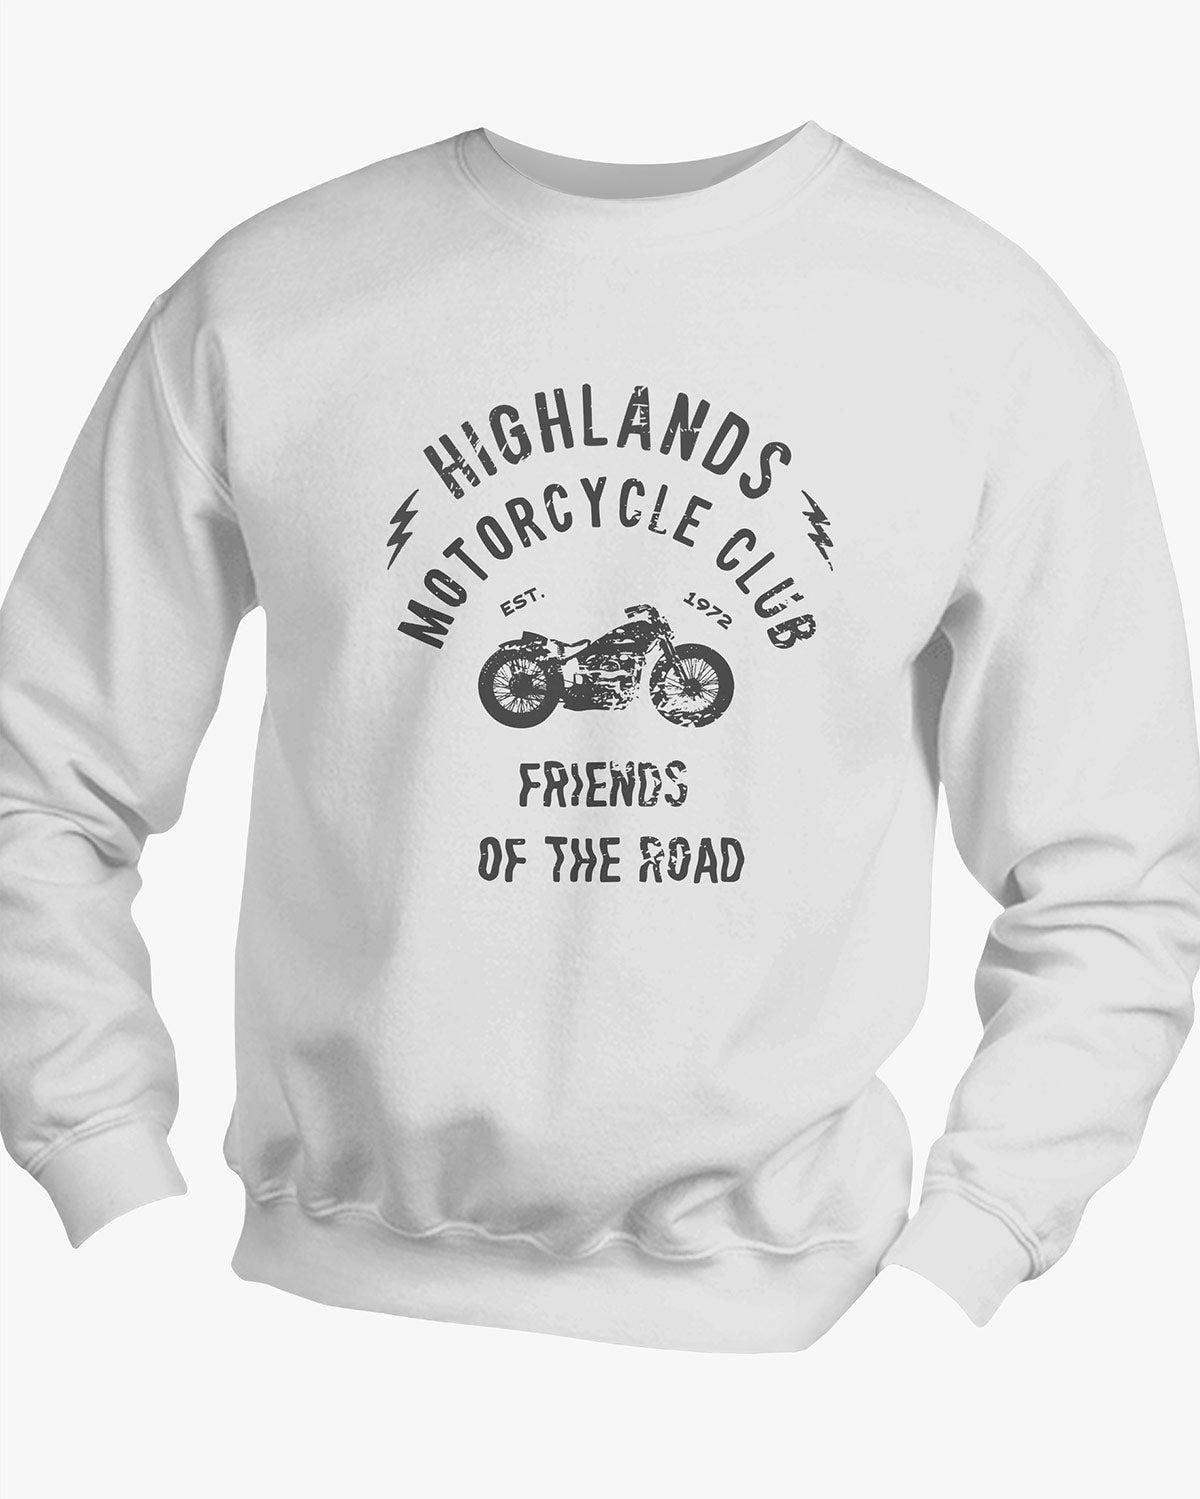 Motorcycle Club - Highlands - Sweater